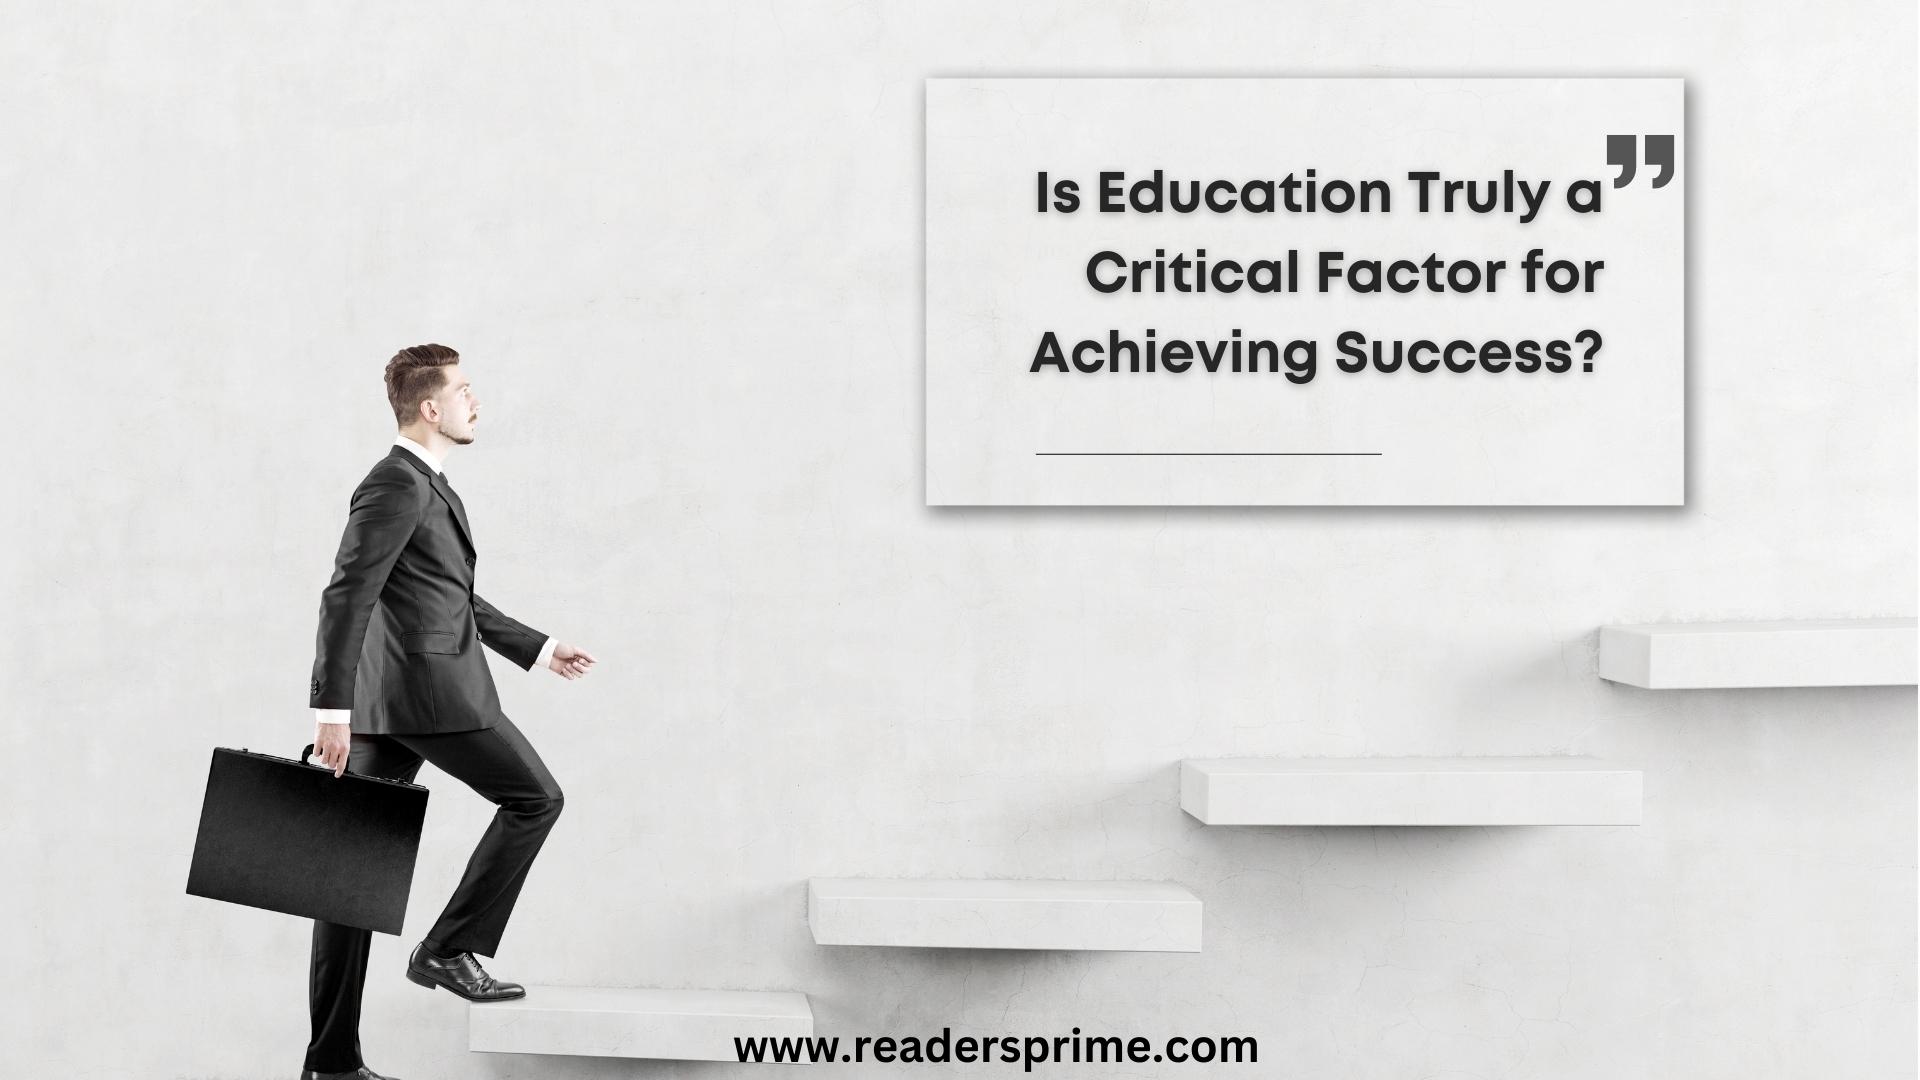 Is Education Truly a Critical Factor for Achieving Success?